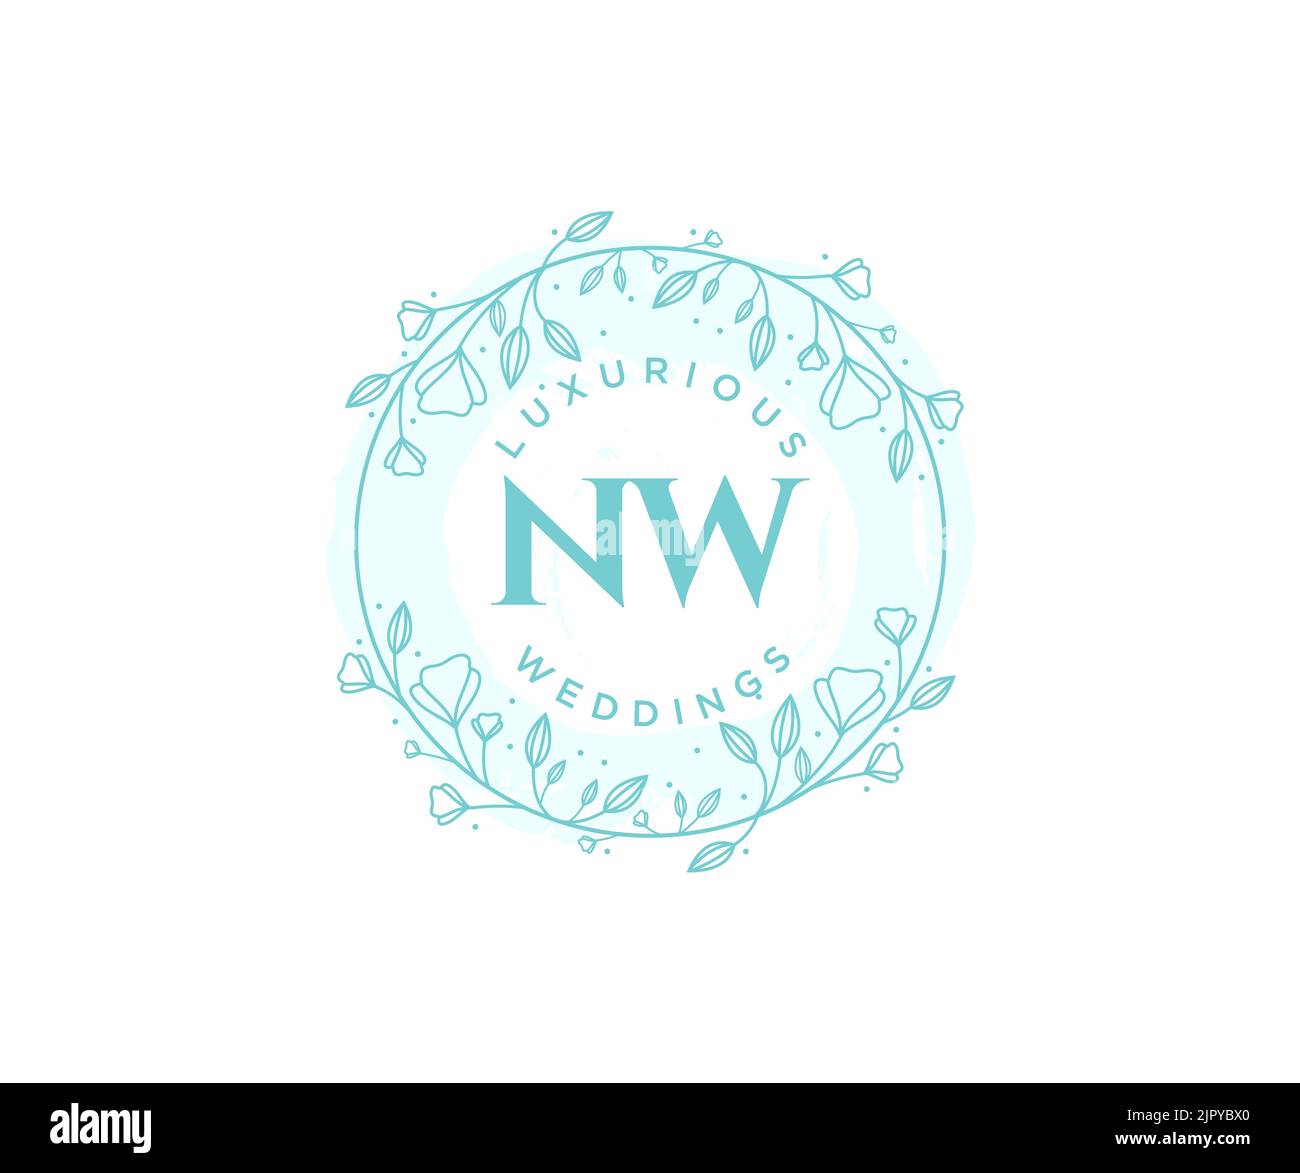 NW Initials letter Wedding monogram logos template, hand drawn modern minimalistic and floral templates for Invitation cards, Save the Date, elegant Stock Vector